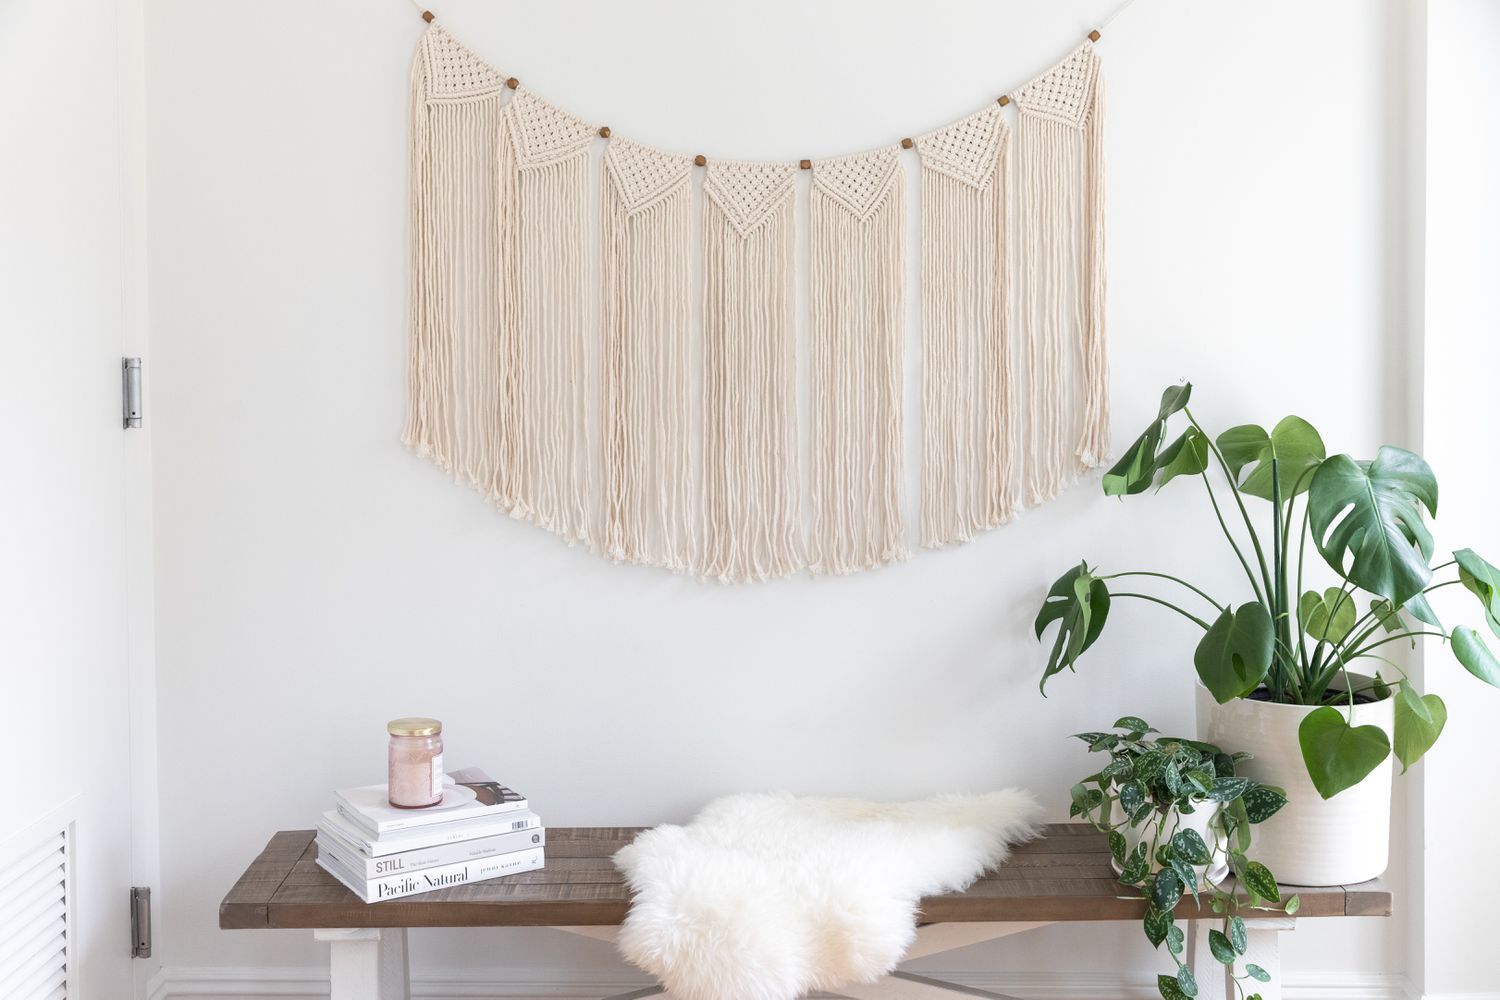 10 Ideas For Using Macrame As Home Decor Within Latest Wall Hanging Decorations (View 9 of 20)